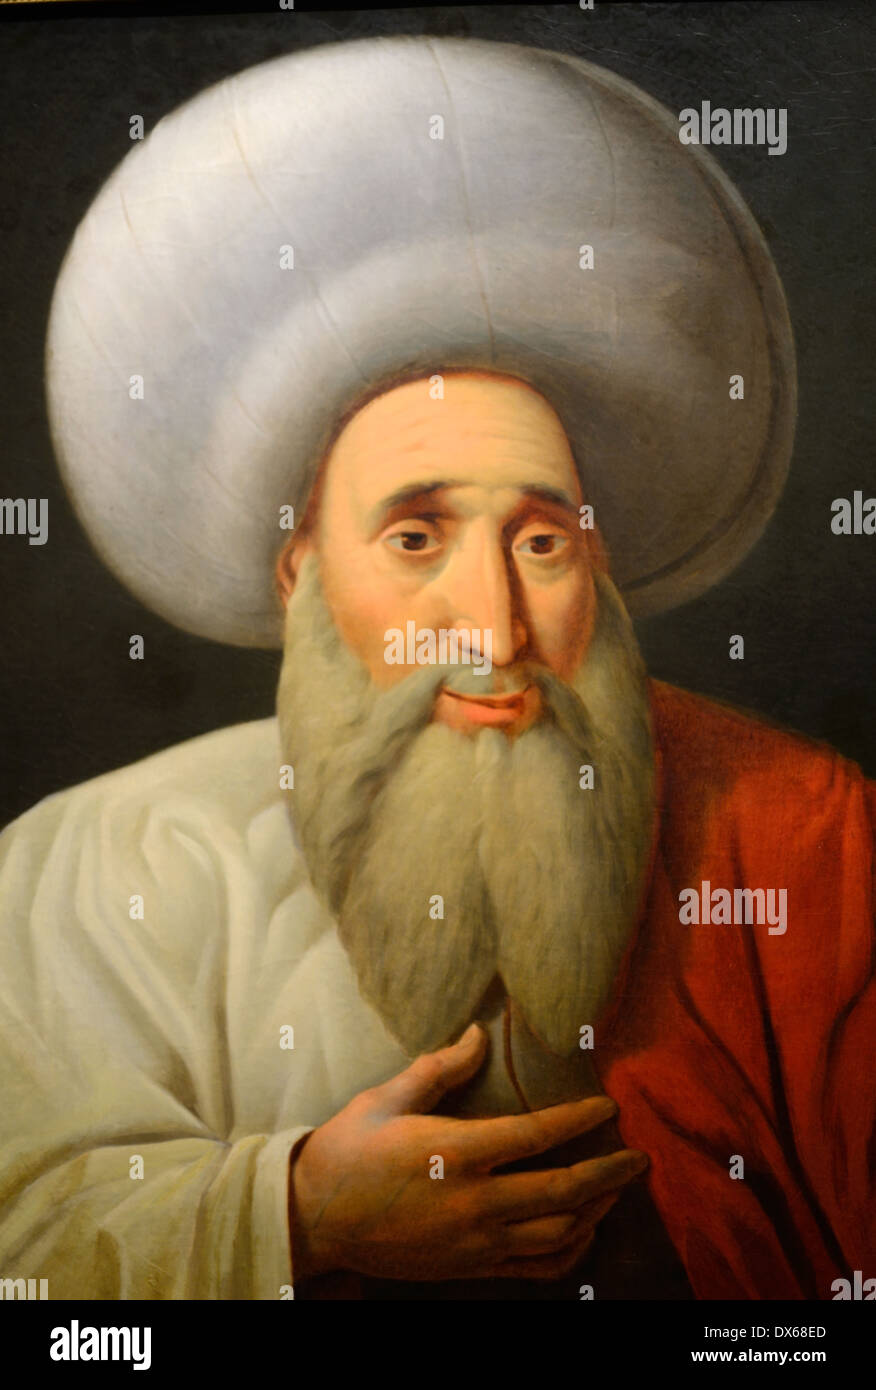 Download preview image - sheikh-abd-allah-al-sharqawi-1737-1812-egyptian-scholar-wearing-traditional-DX68ED